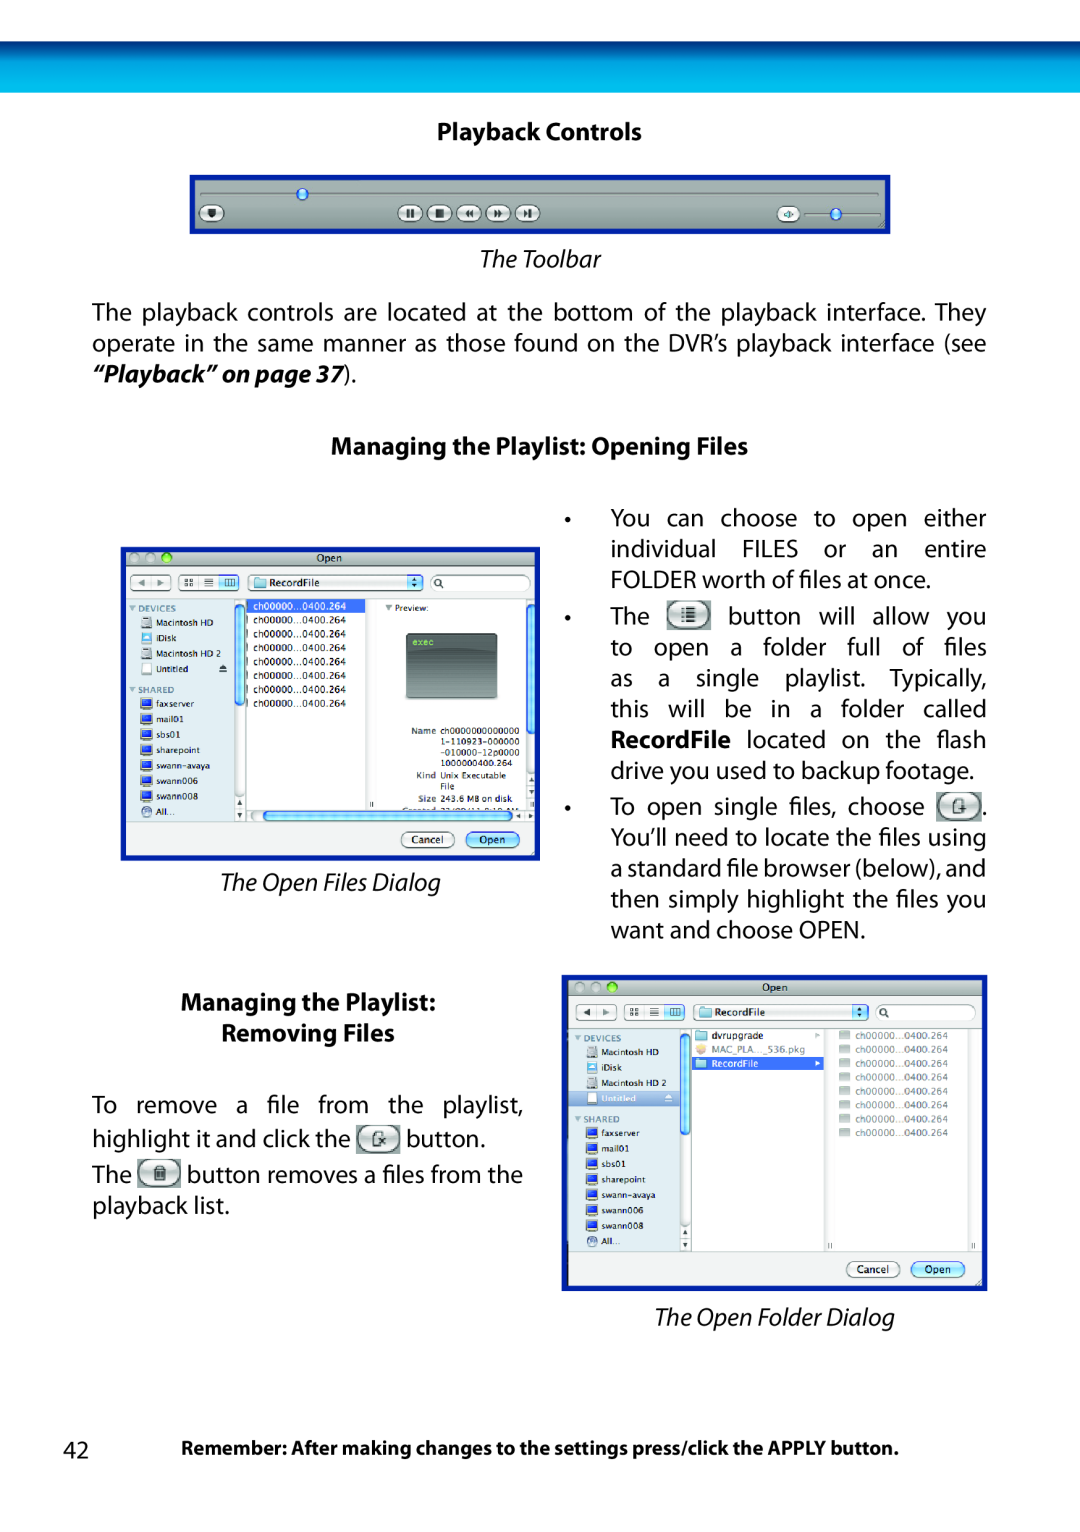 Swann H.264 The Toolbar, Managing the Playlist: Opening Files, The Open Files Dialog, Managing the Playlist Removing Files 